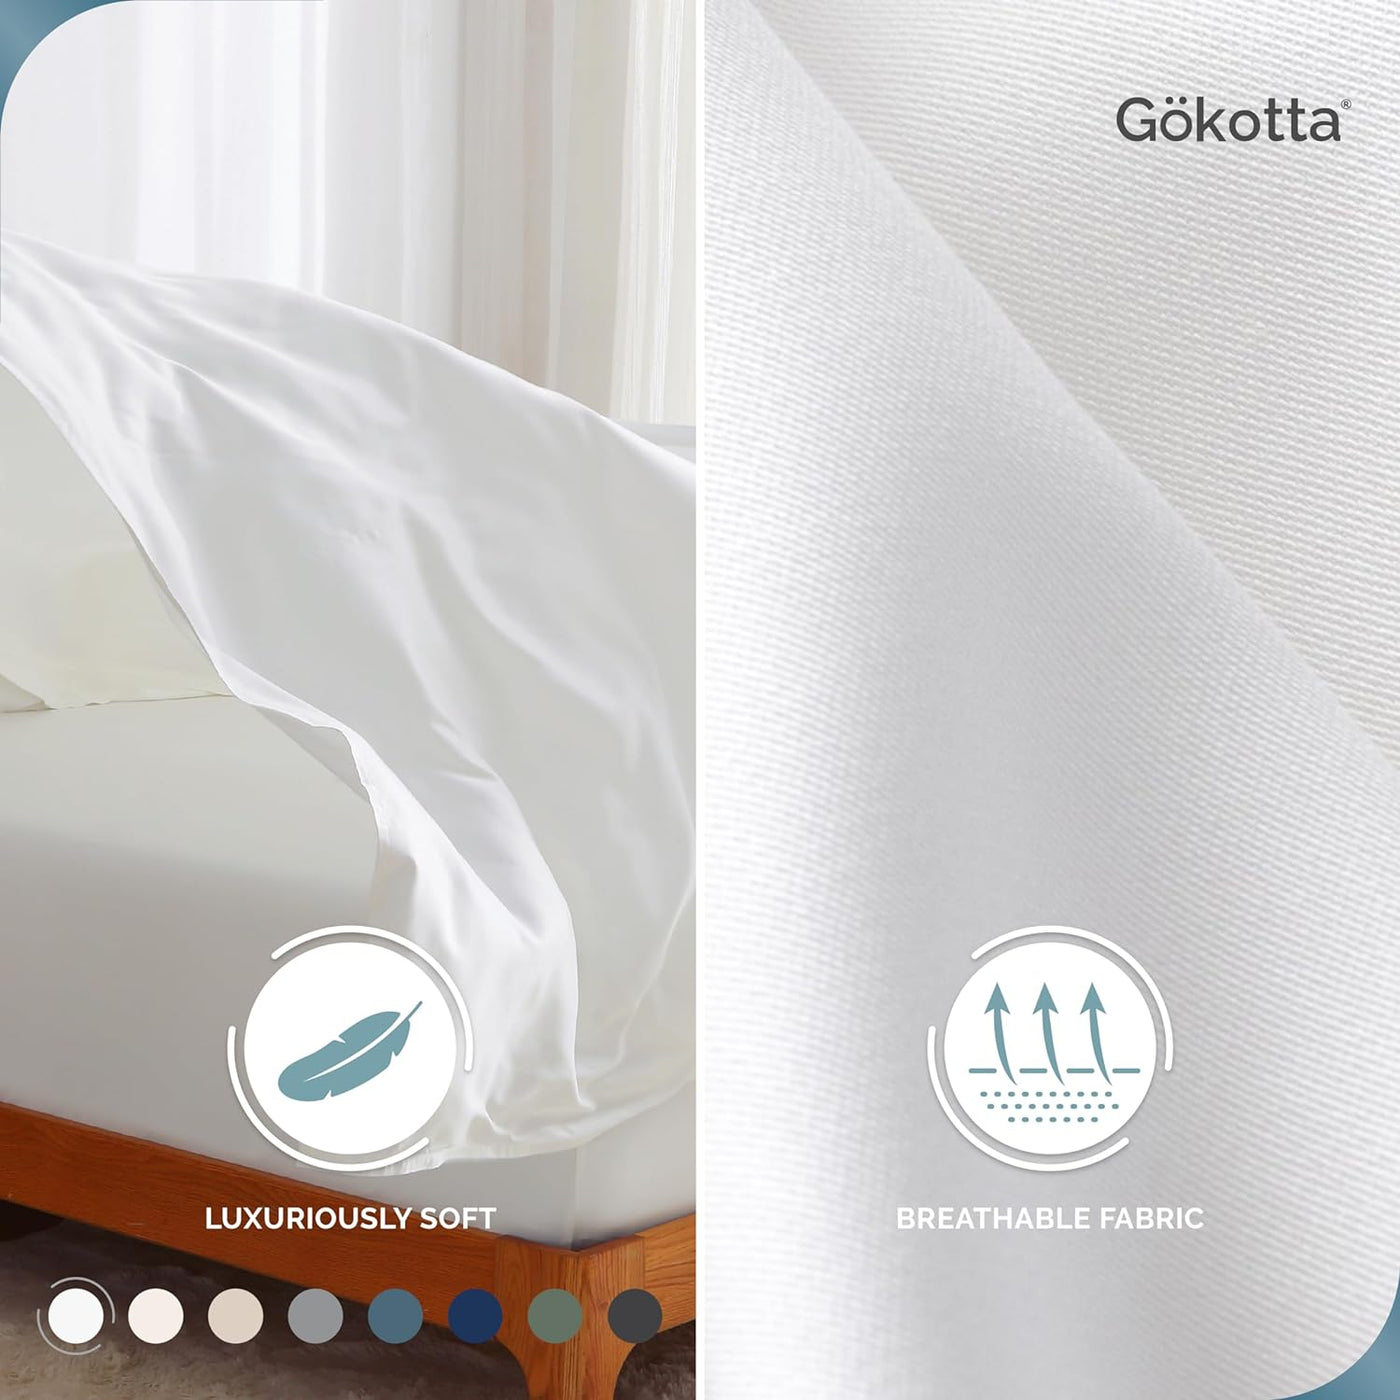 GOKOTTA Bamboo Bed Sheets - 100% Rayon Derived from Bamboo, Breathable Soft Cooling Sheets,  15-16" Deep Pocket Fitted Sheet with Elastic Corner Straps, Bright White